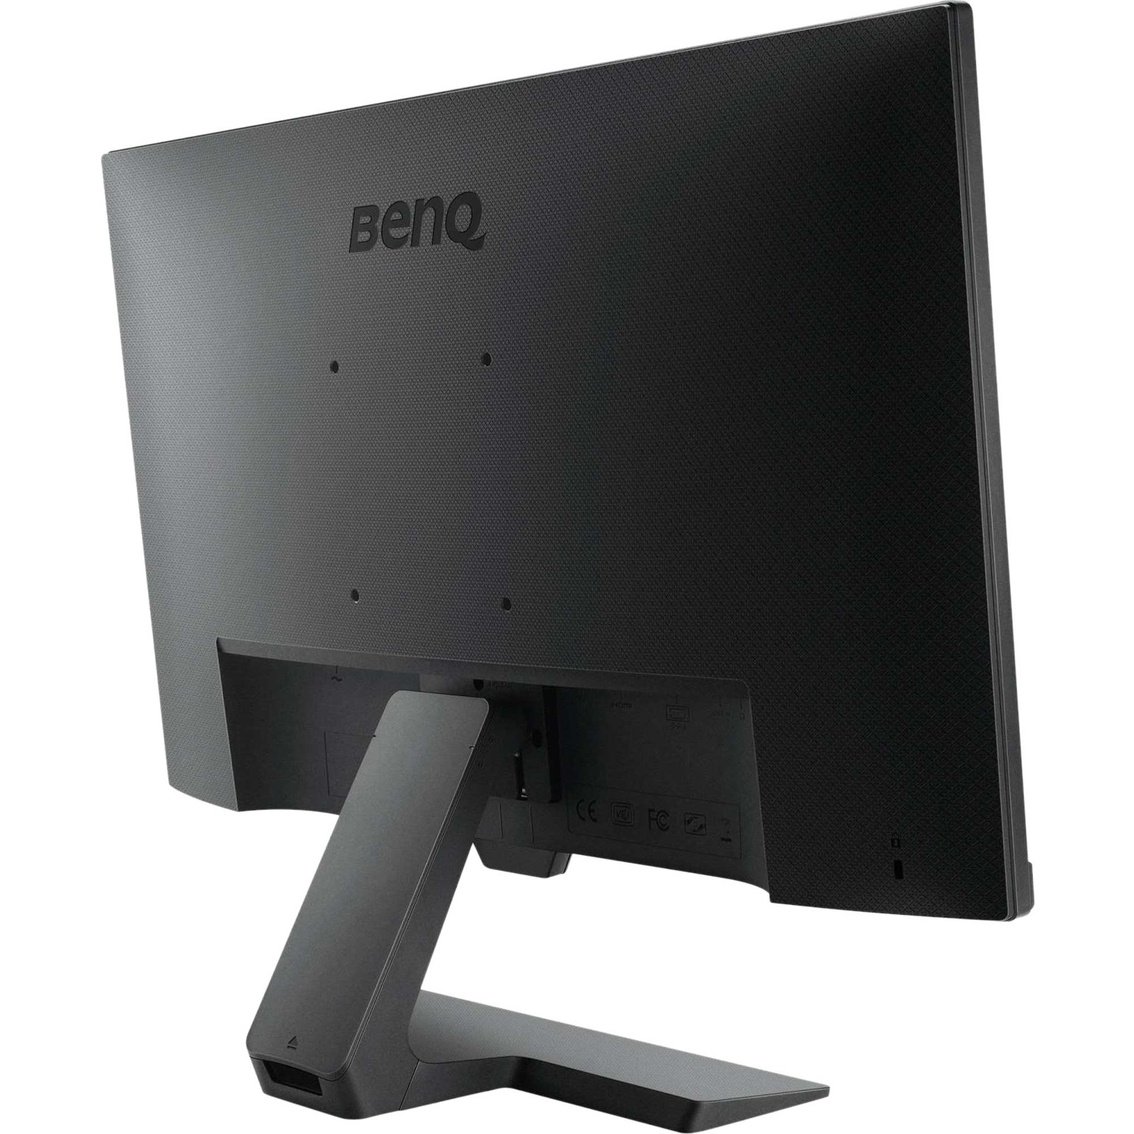 BenQ GW2780 27 in. Monitor - Image 5 of 5